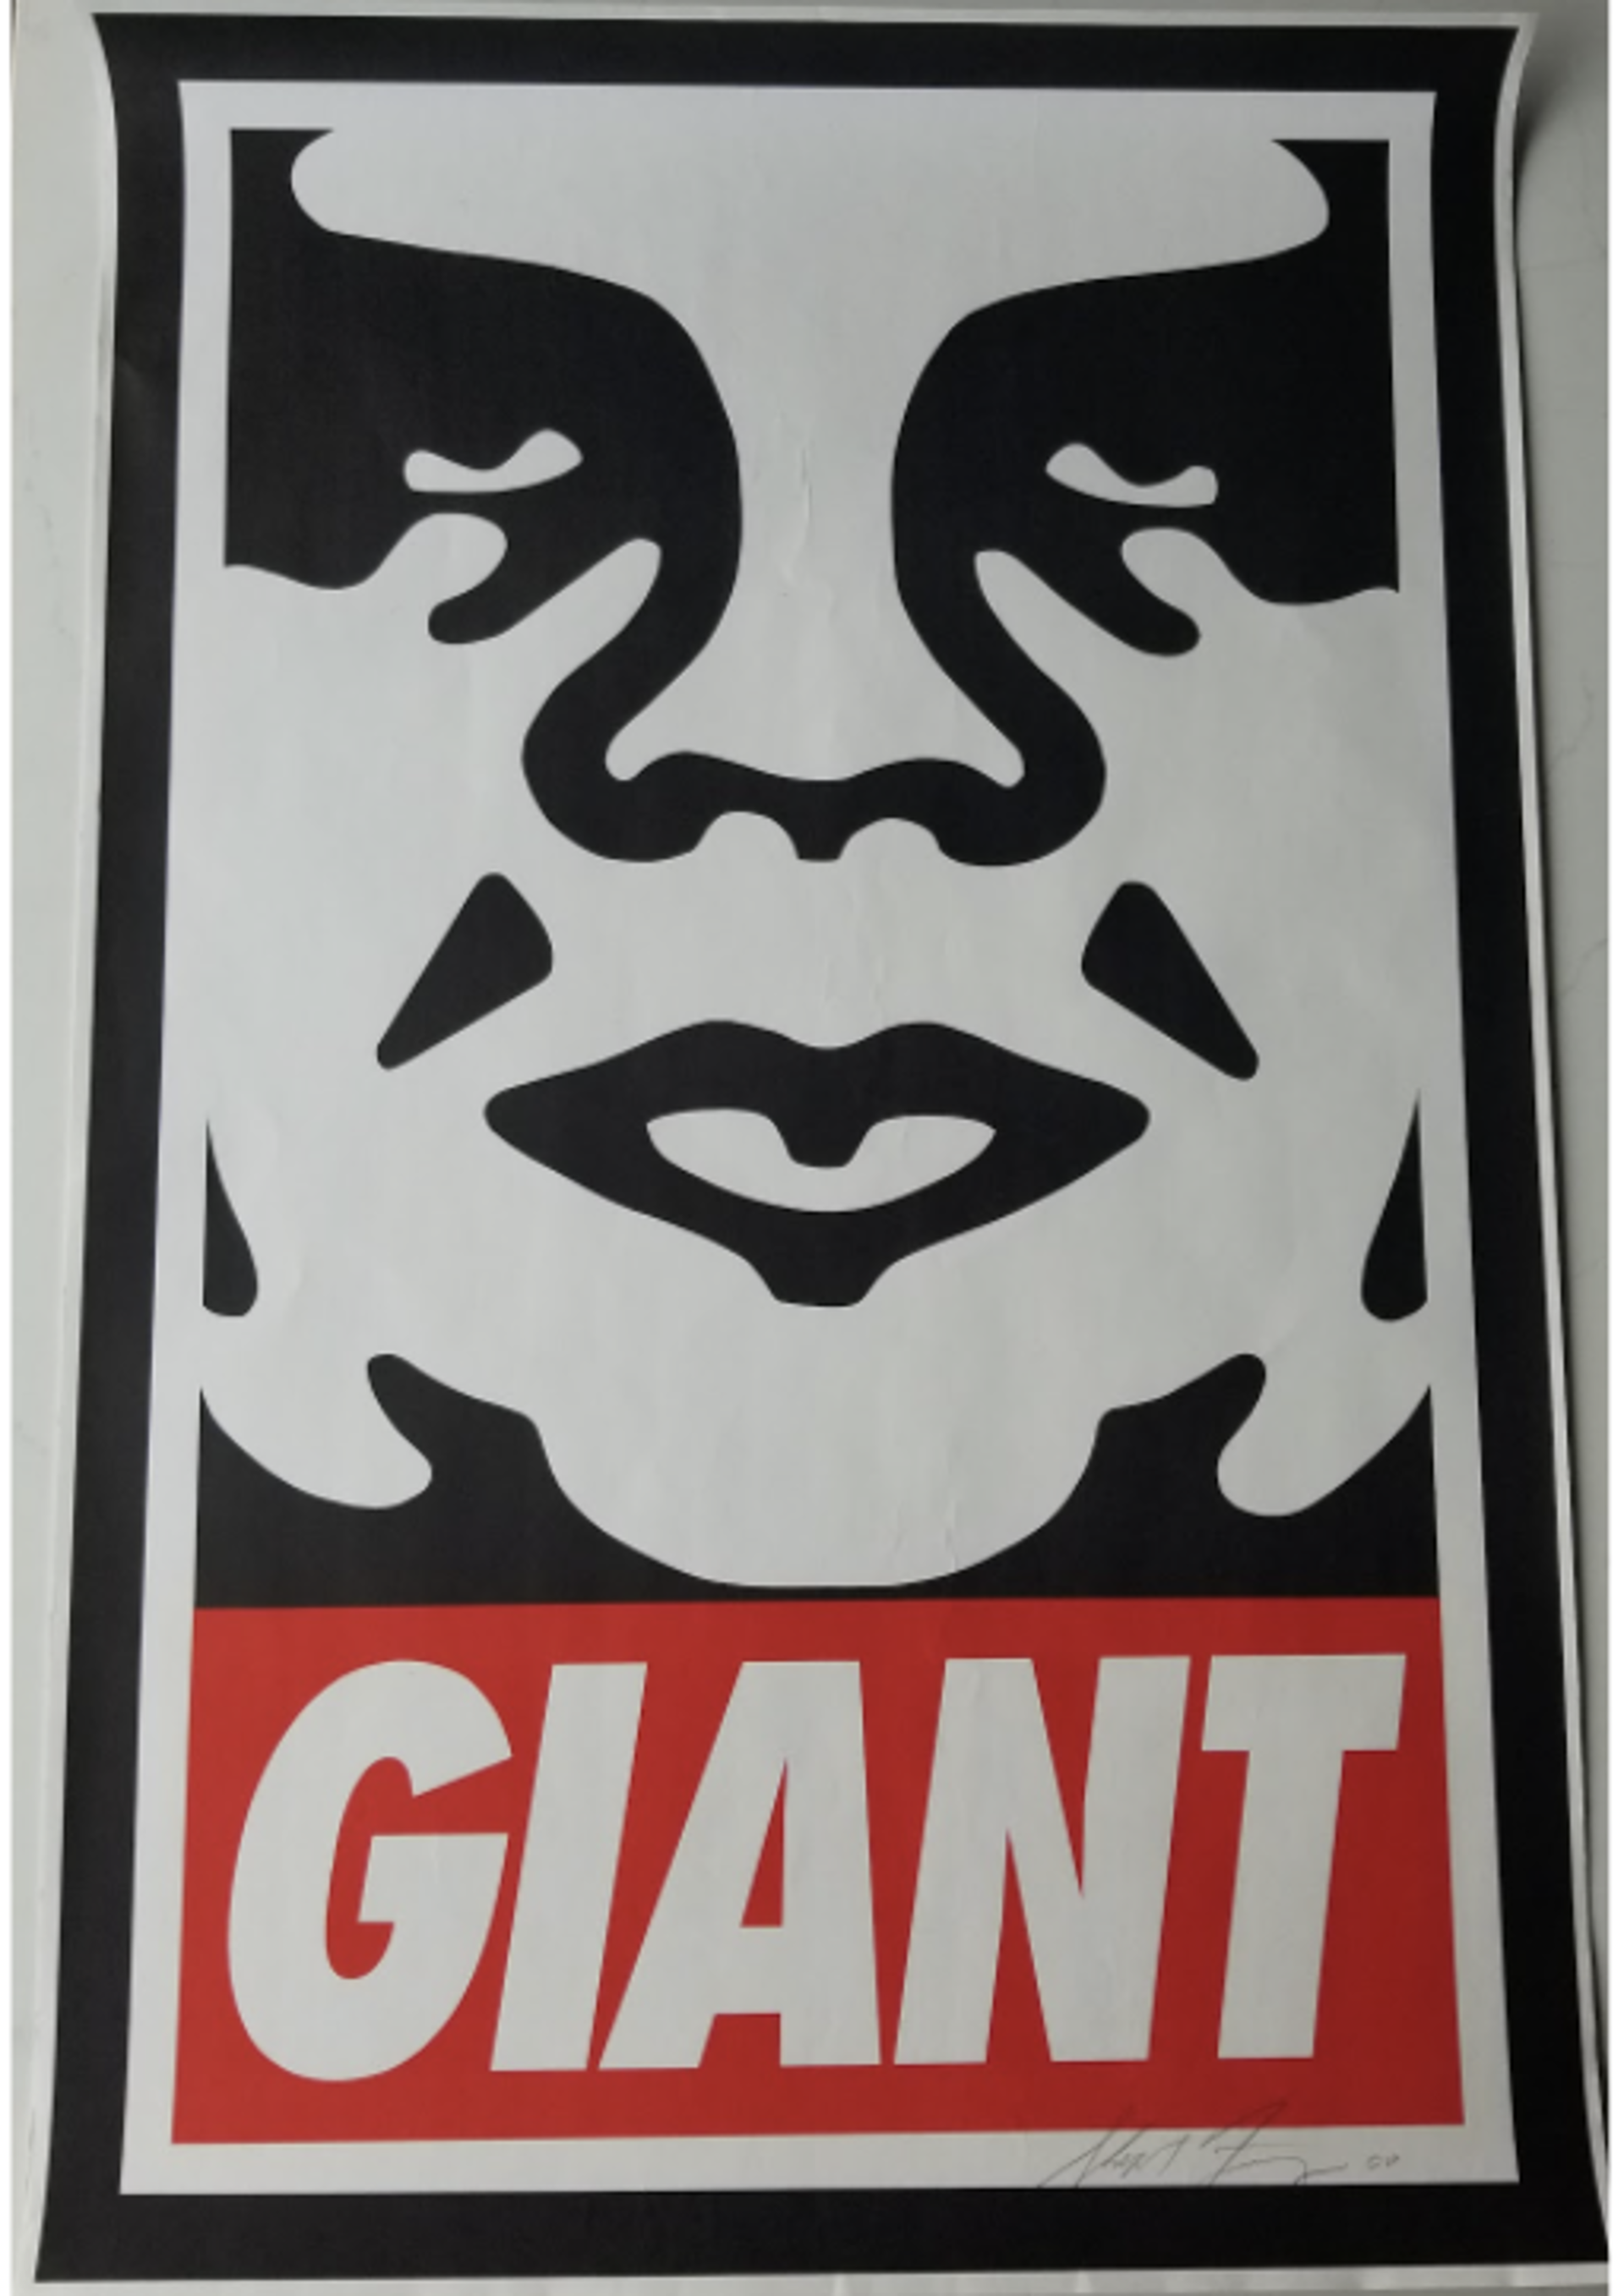 Andre The Giant 1998 by Shepard Fairey